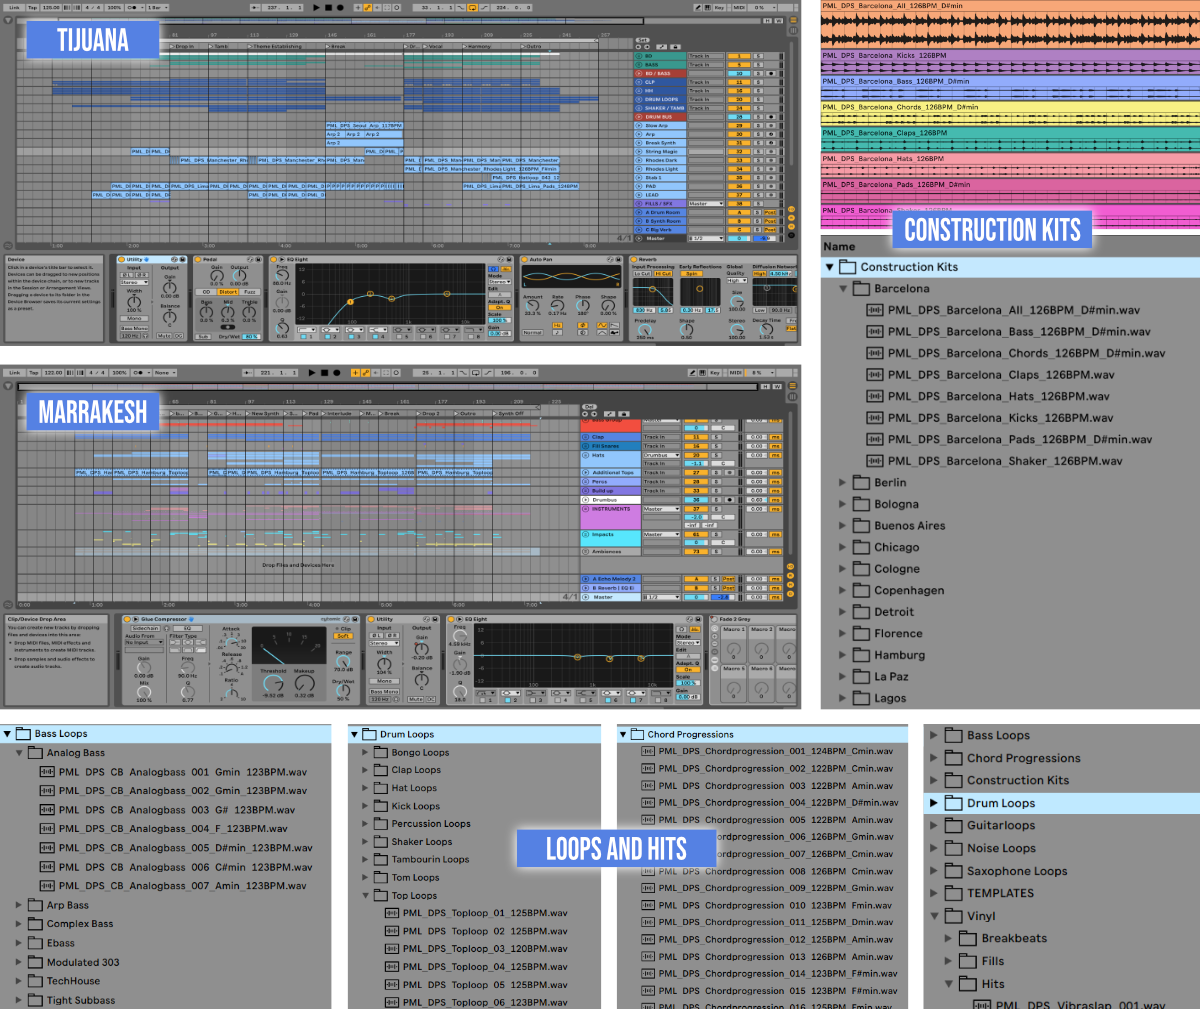 Screen shots of ableton project files, loops, samples